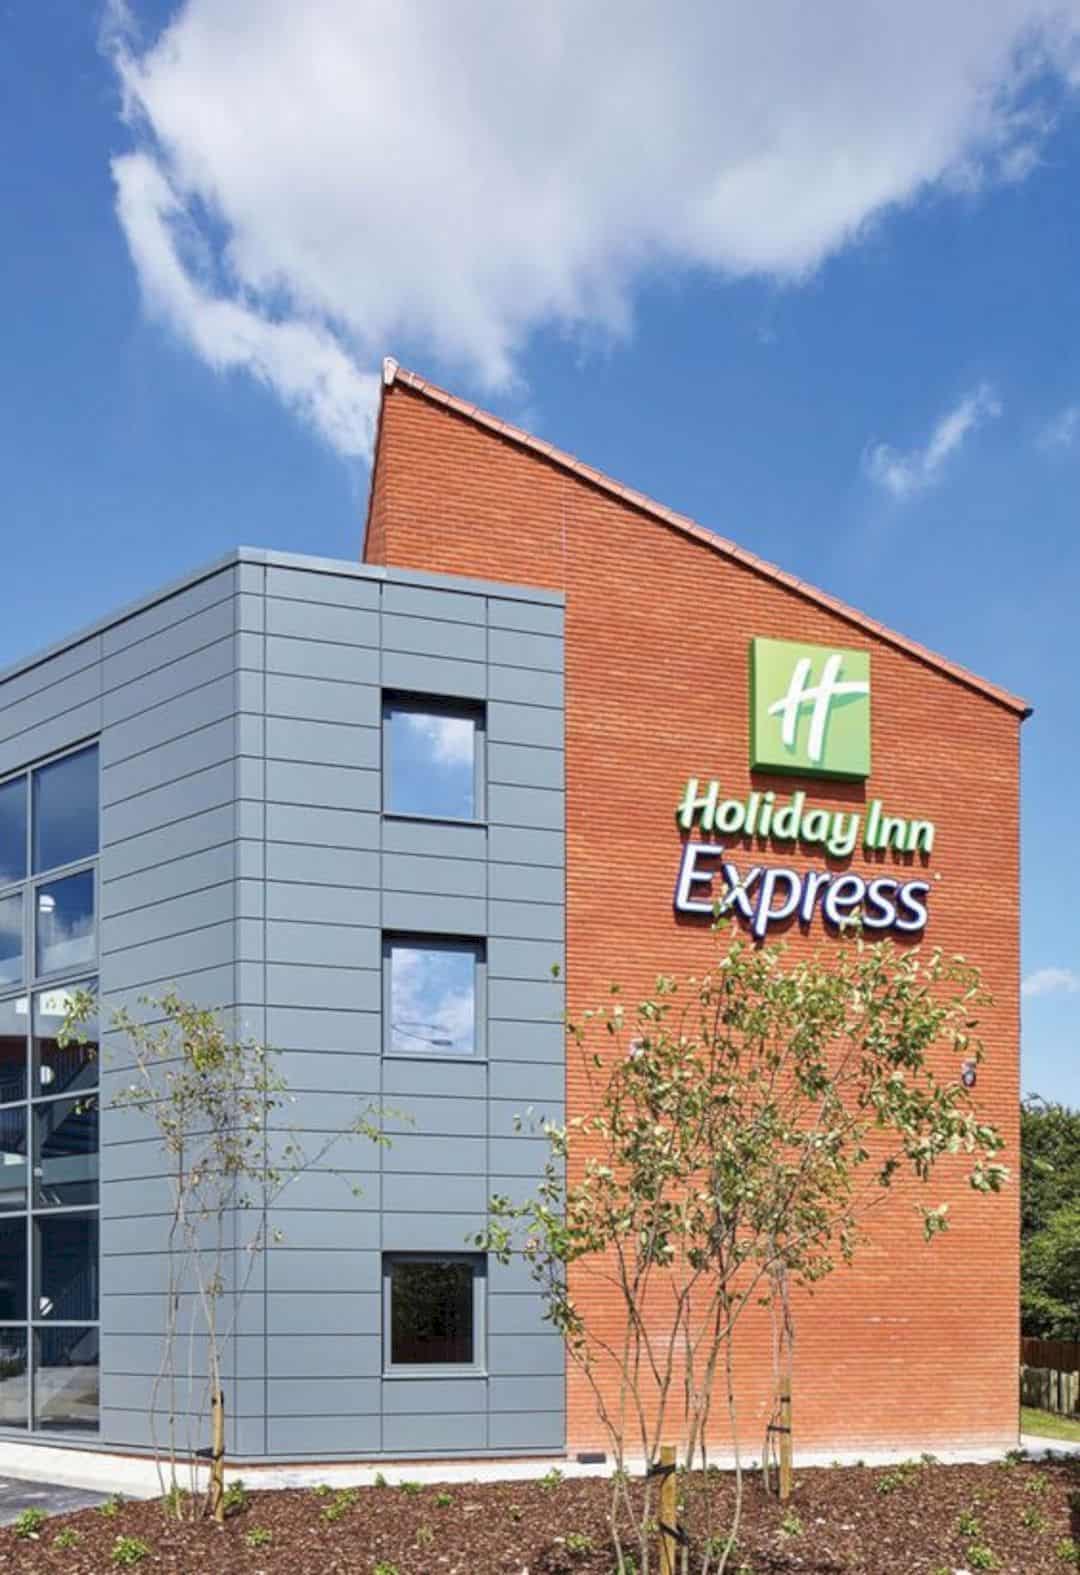 Holiday Inn Express St Albans An Open Lobby Hotel With Imporved And Expanded F & B Offering 5